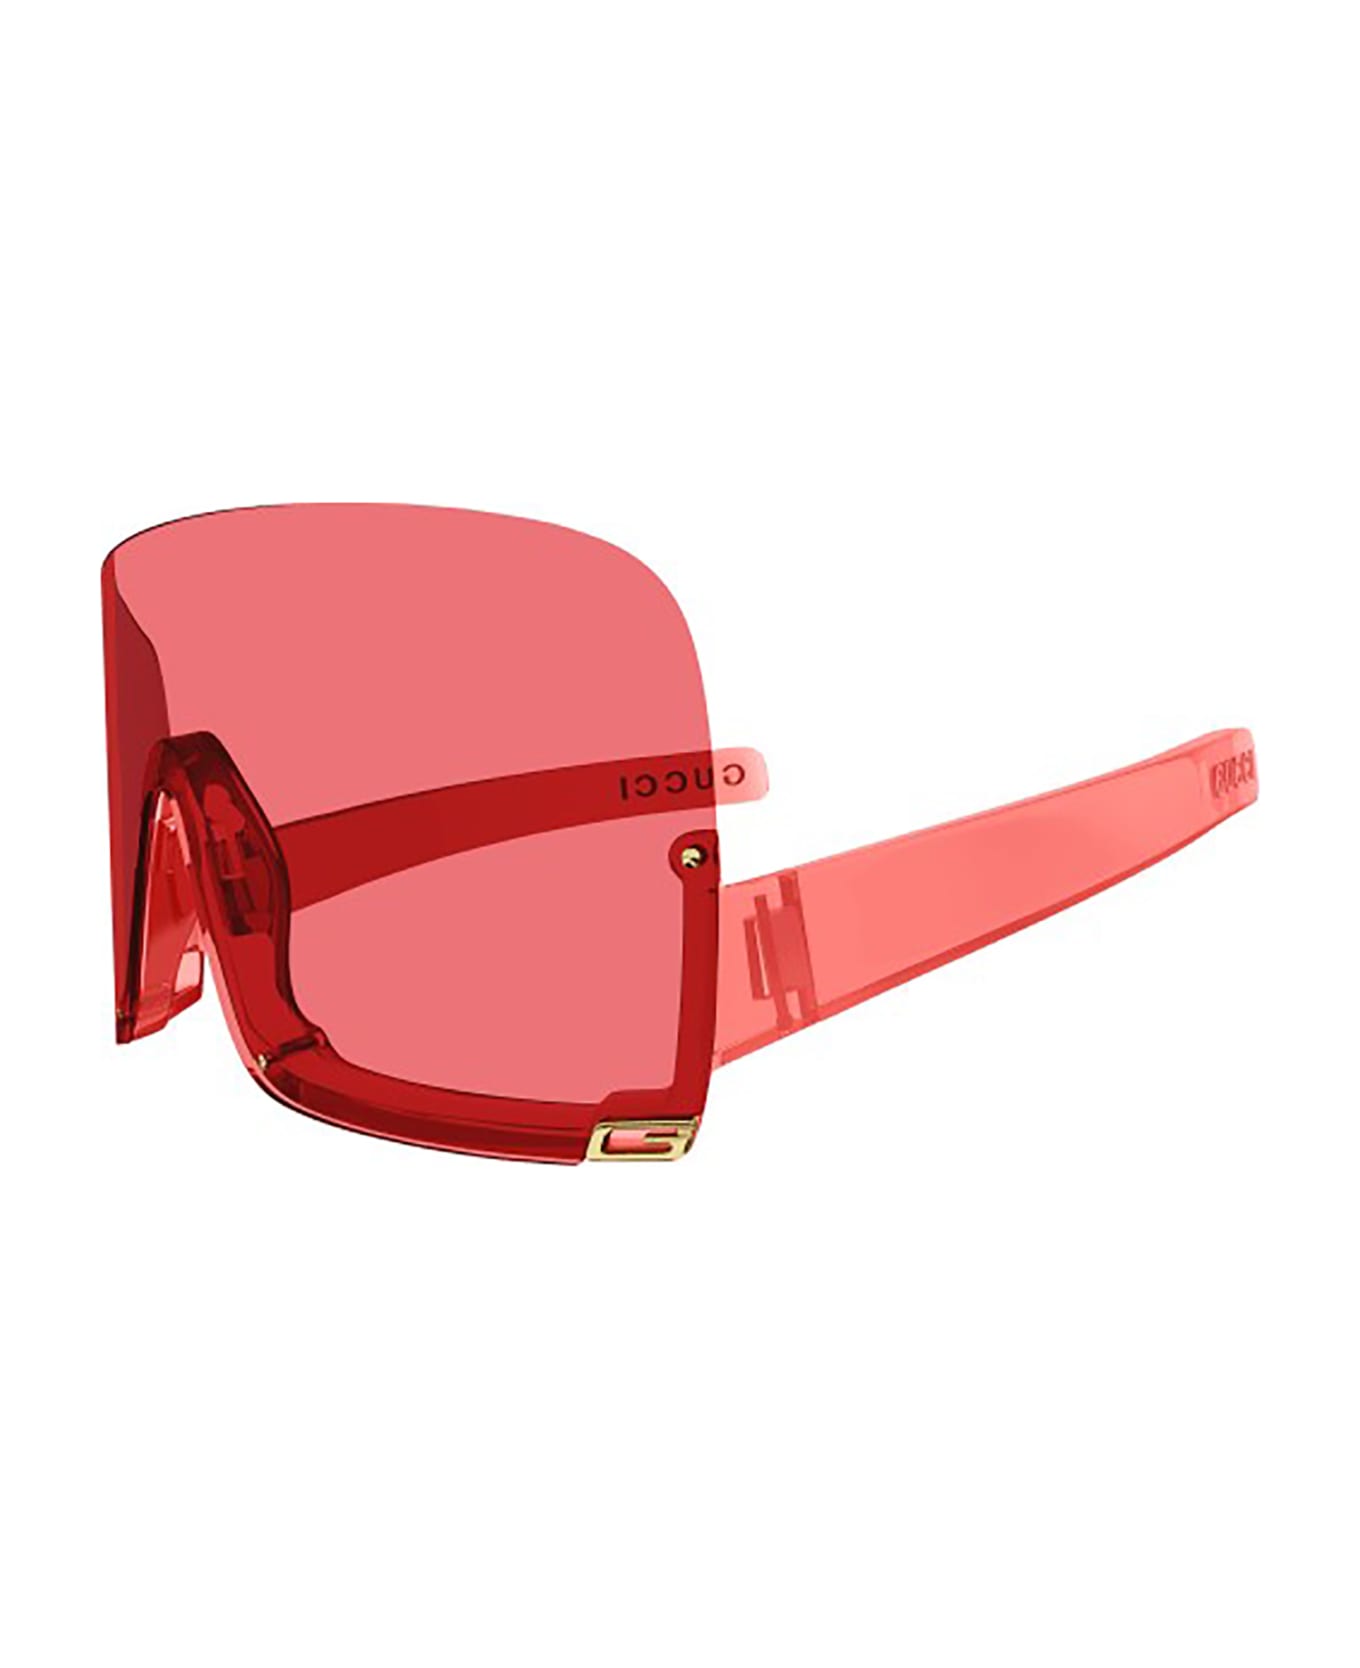 Gucci Eyewear GG1631S Sunglasses - Red Red Red